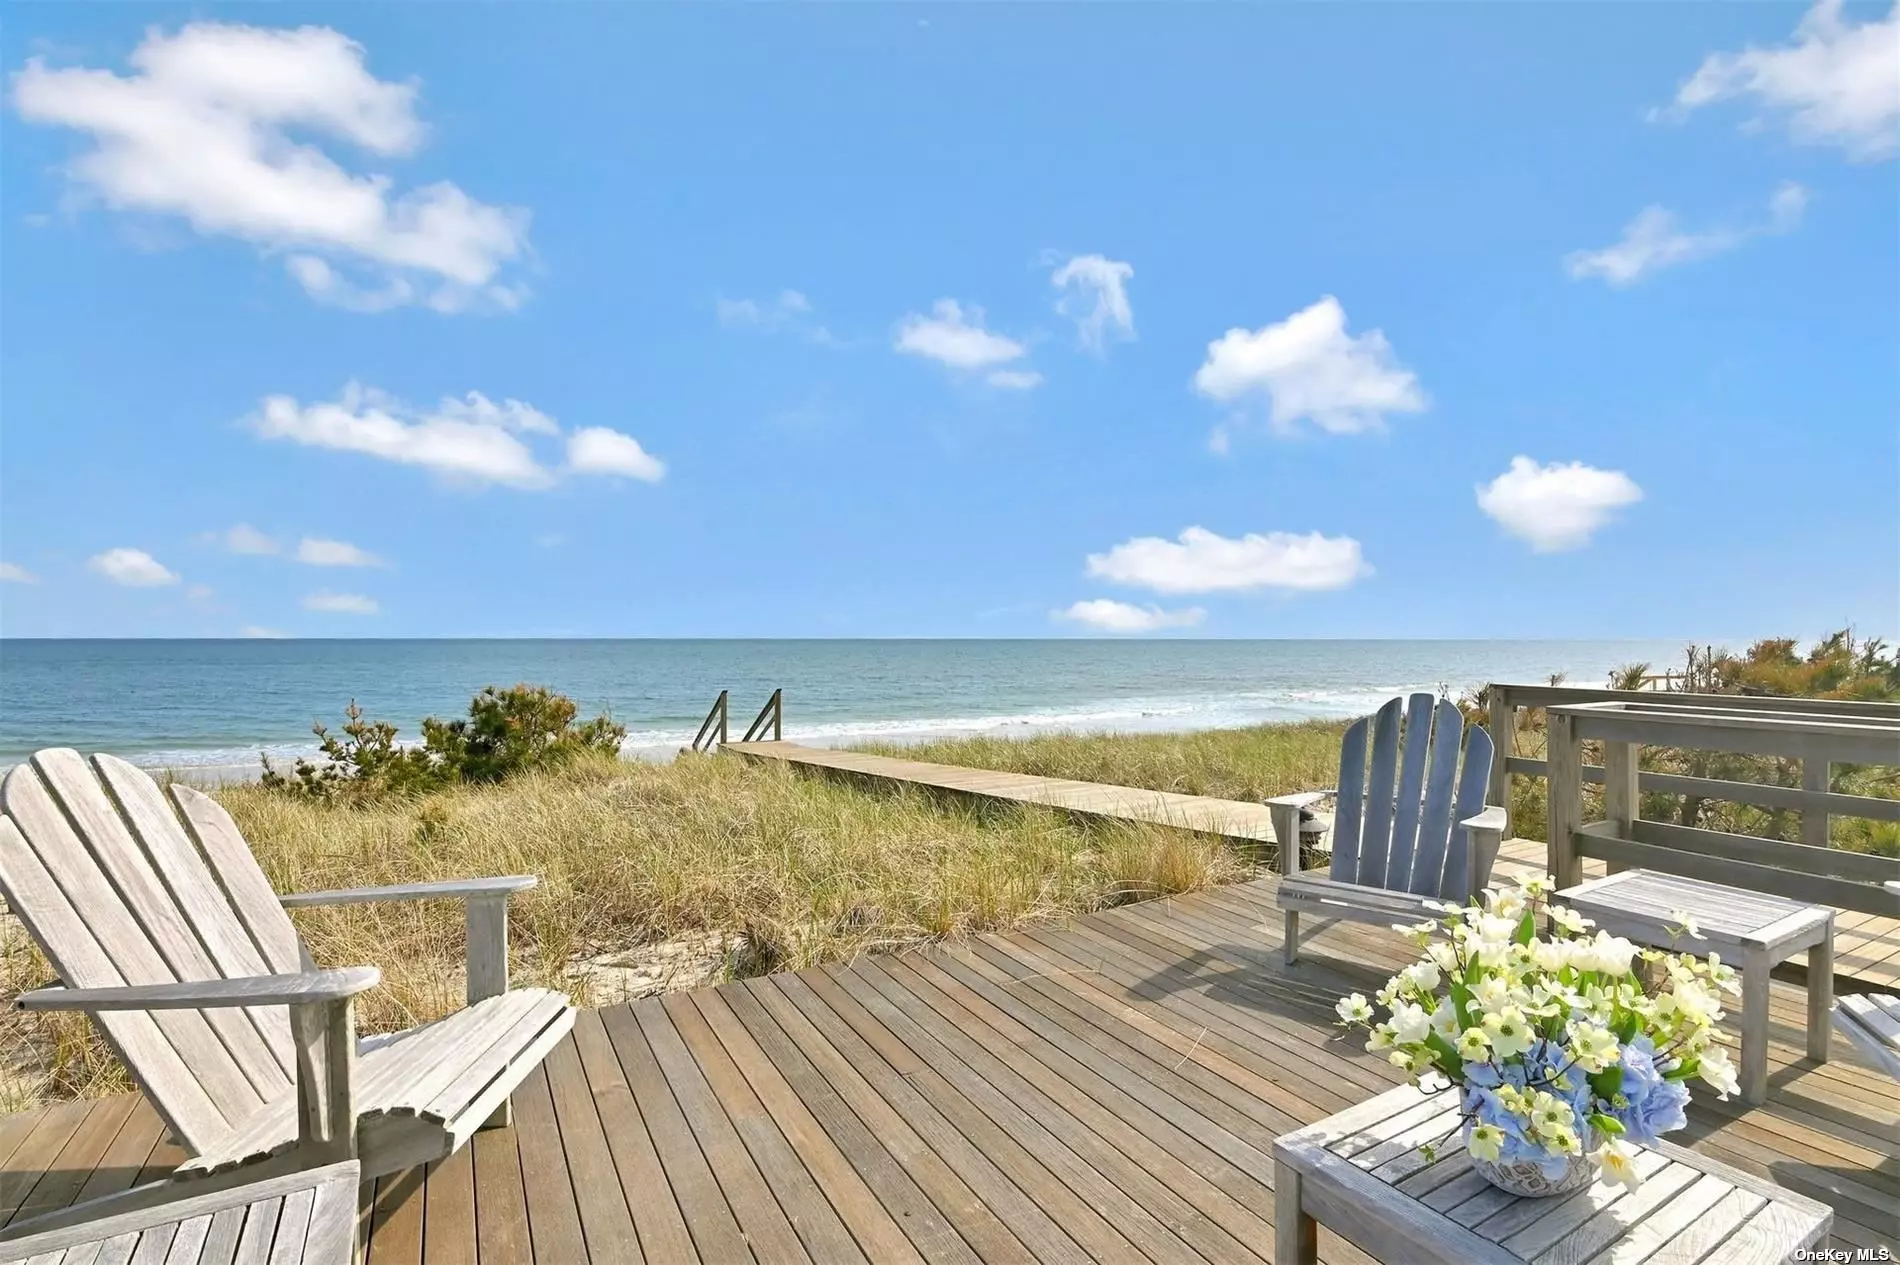 Live in laid back luxury in this oceanfront home in Quogue, one of the most desirable areas of the world famous Hamptons. On 2 acres with 127 feet of shoreline and a pre-existing non-conforming beach deck. A beautiful home, with all the amenities one could want. Five beautiful ensuite guest bedrooms, an awesome master bedroom and bath, an office, two half baths, a living room, formal dining room, spectacular kitchen, a family room, billiard room, elevator, fireplaces everywhere, an enormous swimming pool area with heated gunite swimming pool, decks, whole house backup generator, gorgeous landscaping and your own access to the pristine beach. And much more. Reward yourself, buy the beach house.